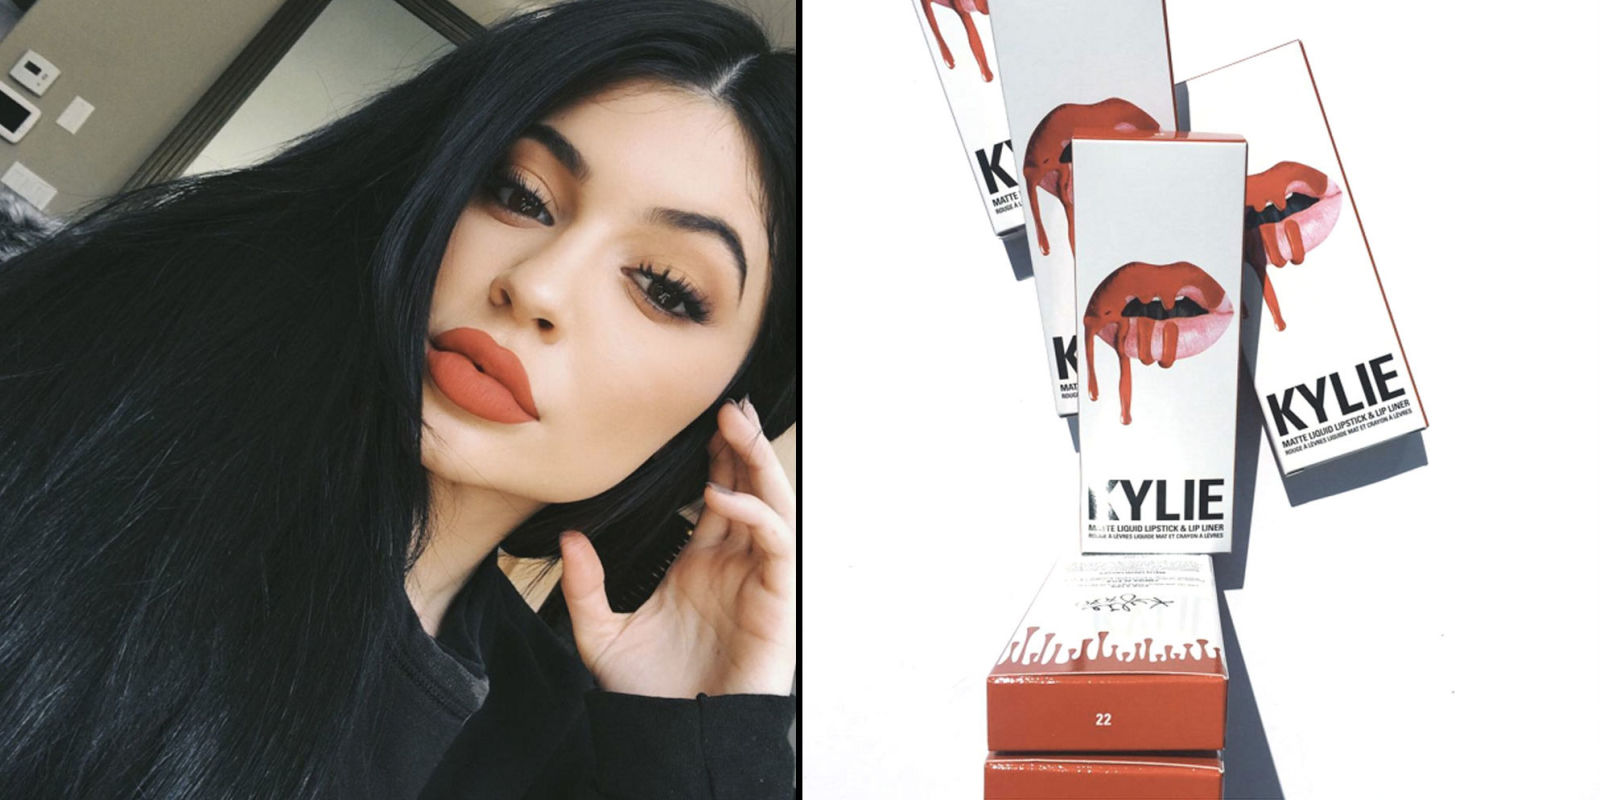 Kylie Jenner's lip kits have taken the beauty industry by storm Image from: www.comsopolitan.com